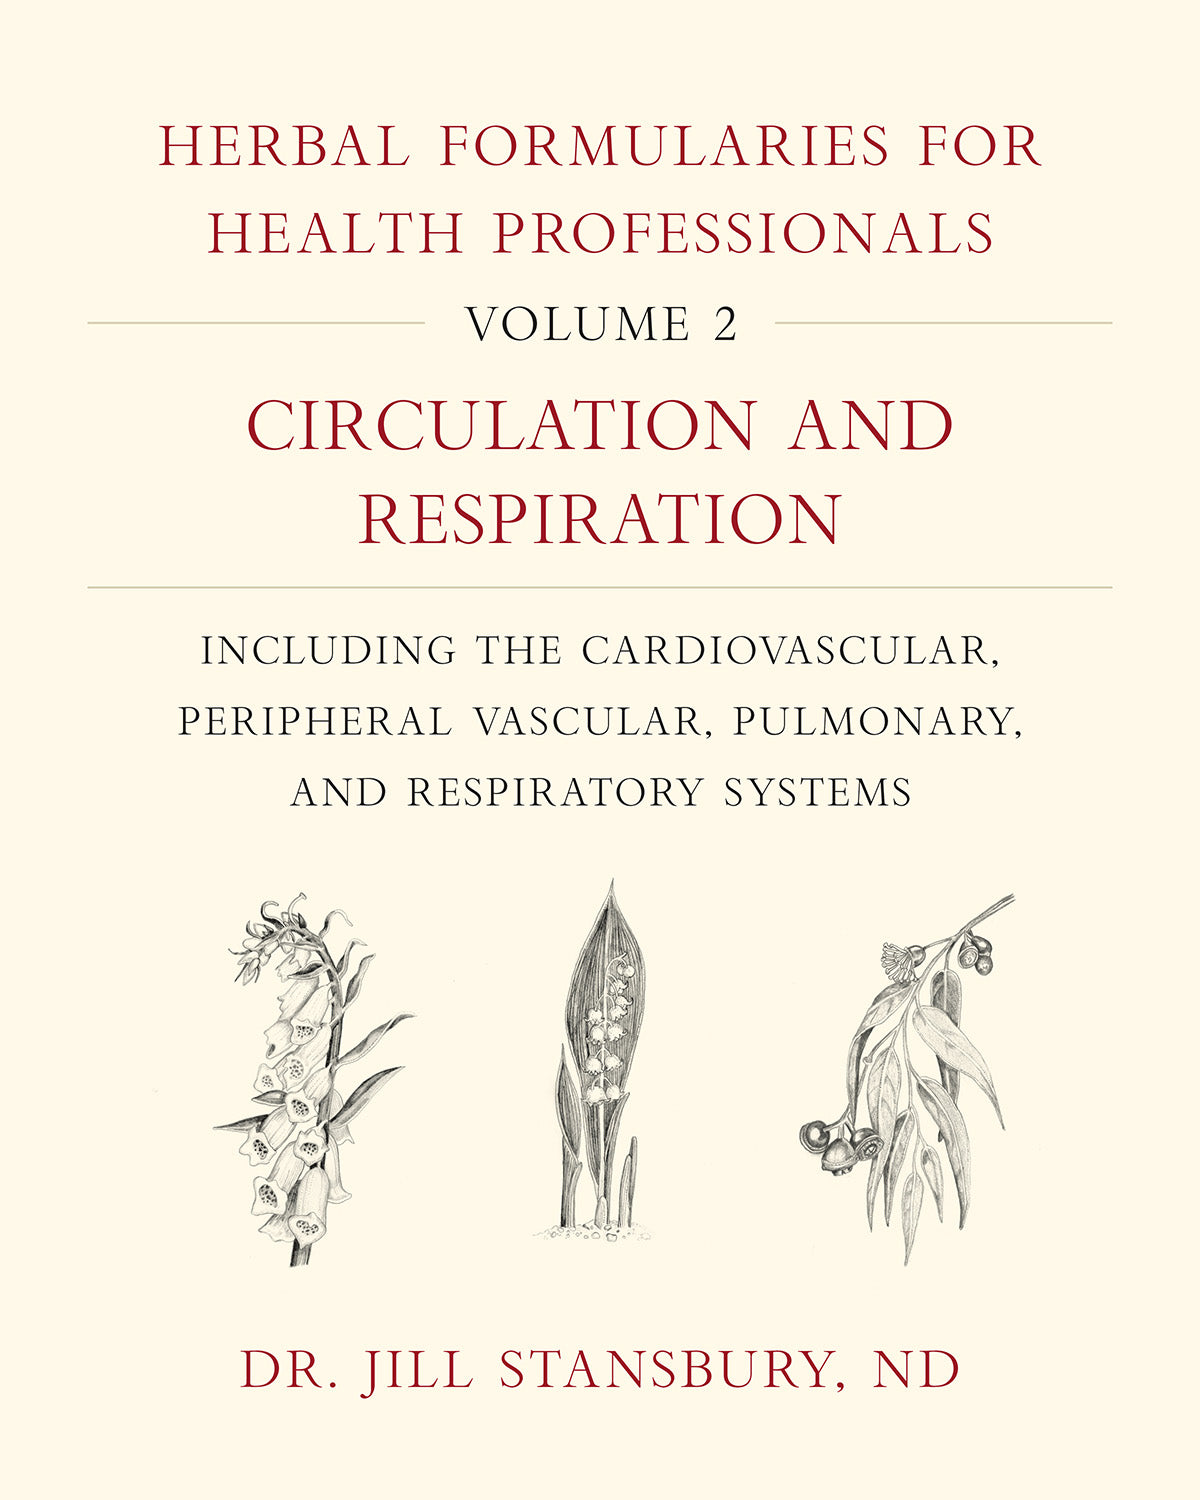 Herbal Formularies for Health Professionals - 5 Volumes by Jill Stansbury